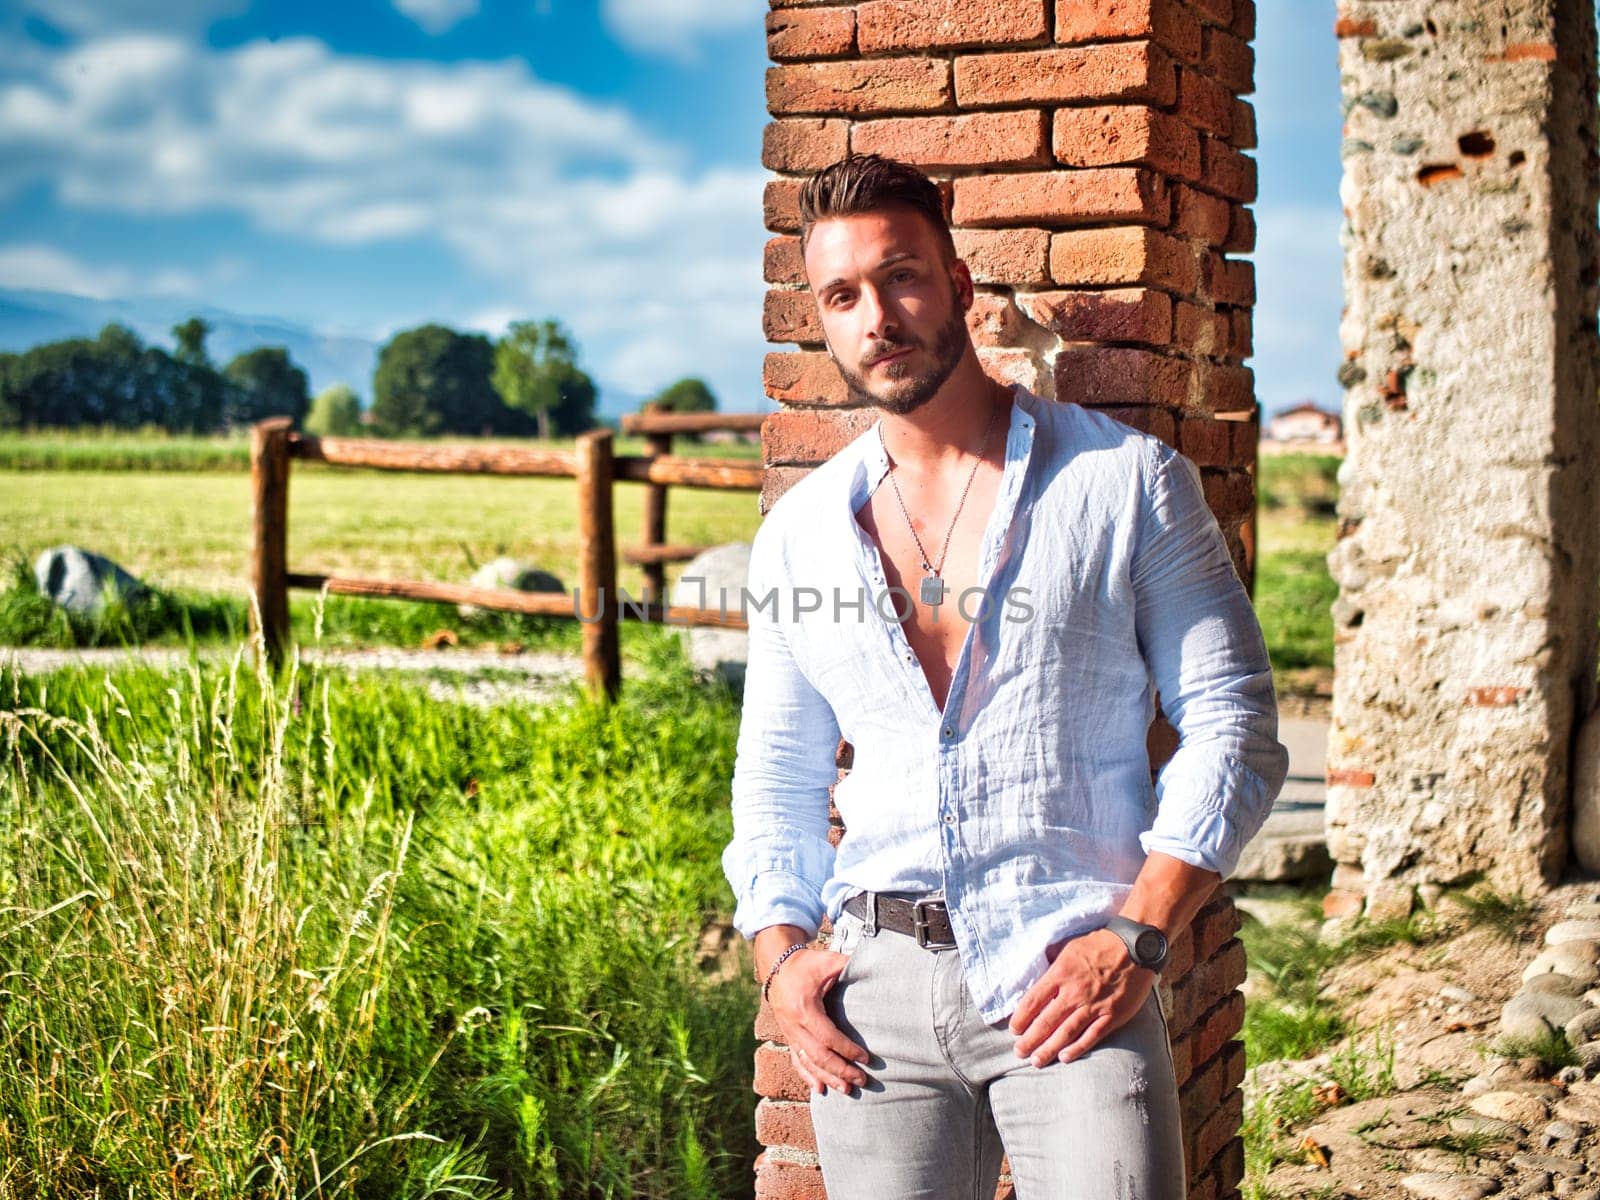 A man leaning against a brick wall in front of a corn field